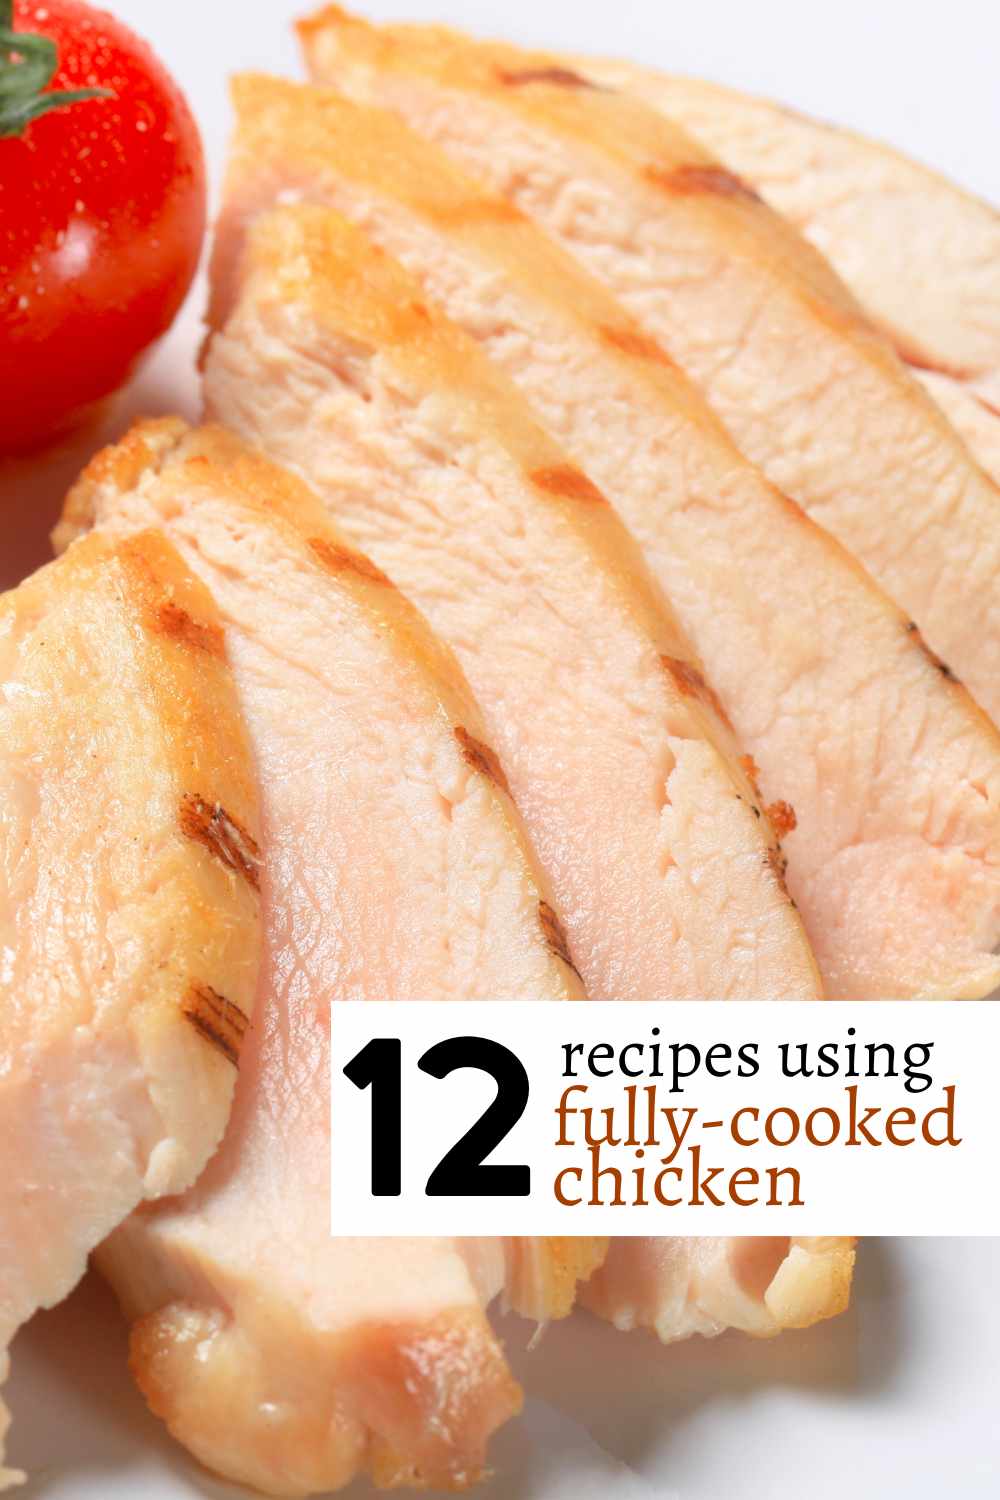 Fully-cooked chicken goes on sale super often in grocery stores! Here's a list of recipes using fully-cooked chicken that'd be great for busy nights.